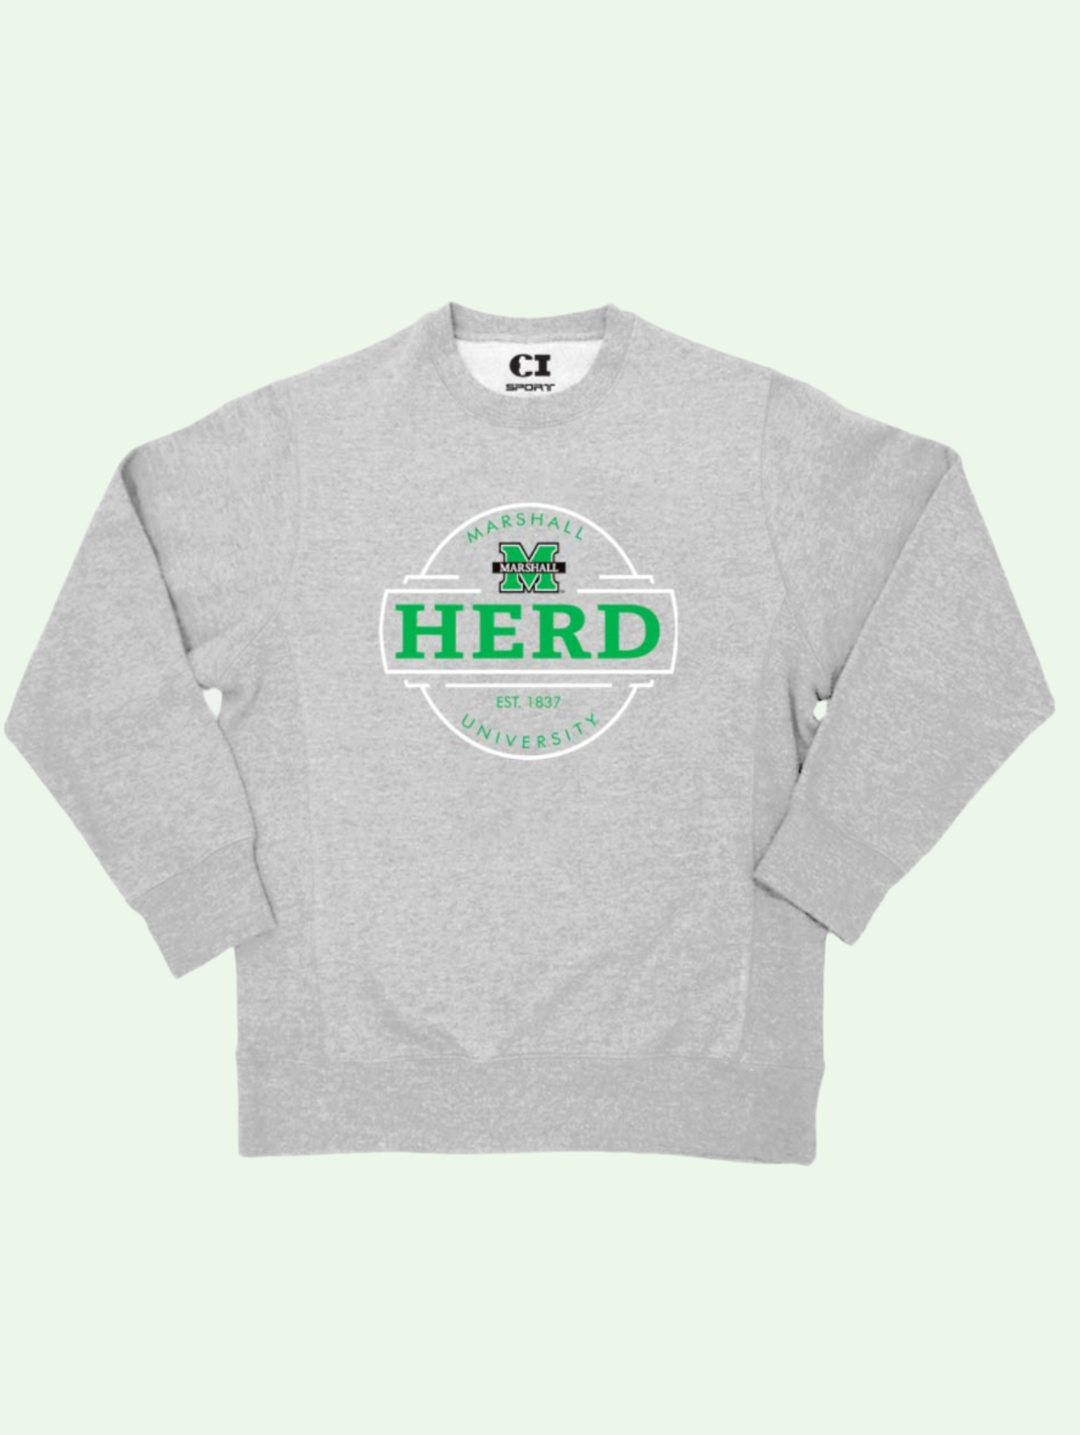 a light grey sweatshirt with a circular logo on the center chest with the marshall m logo and HERD in the center